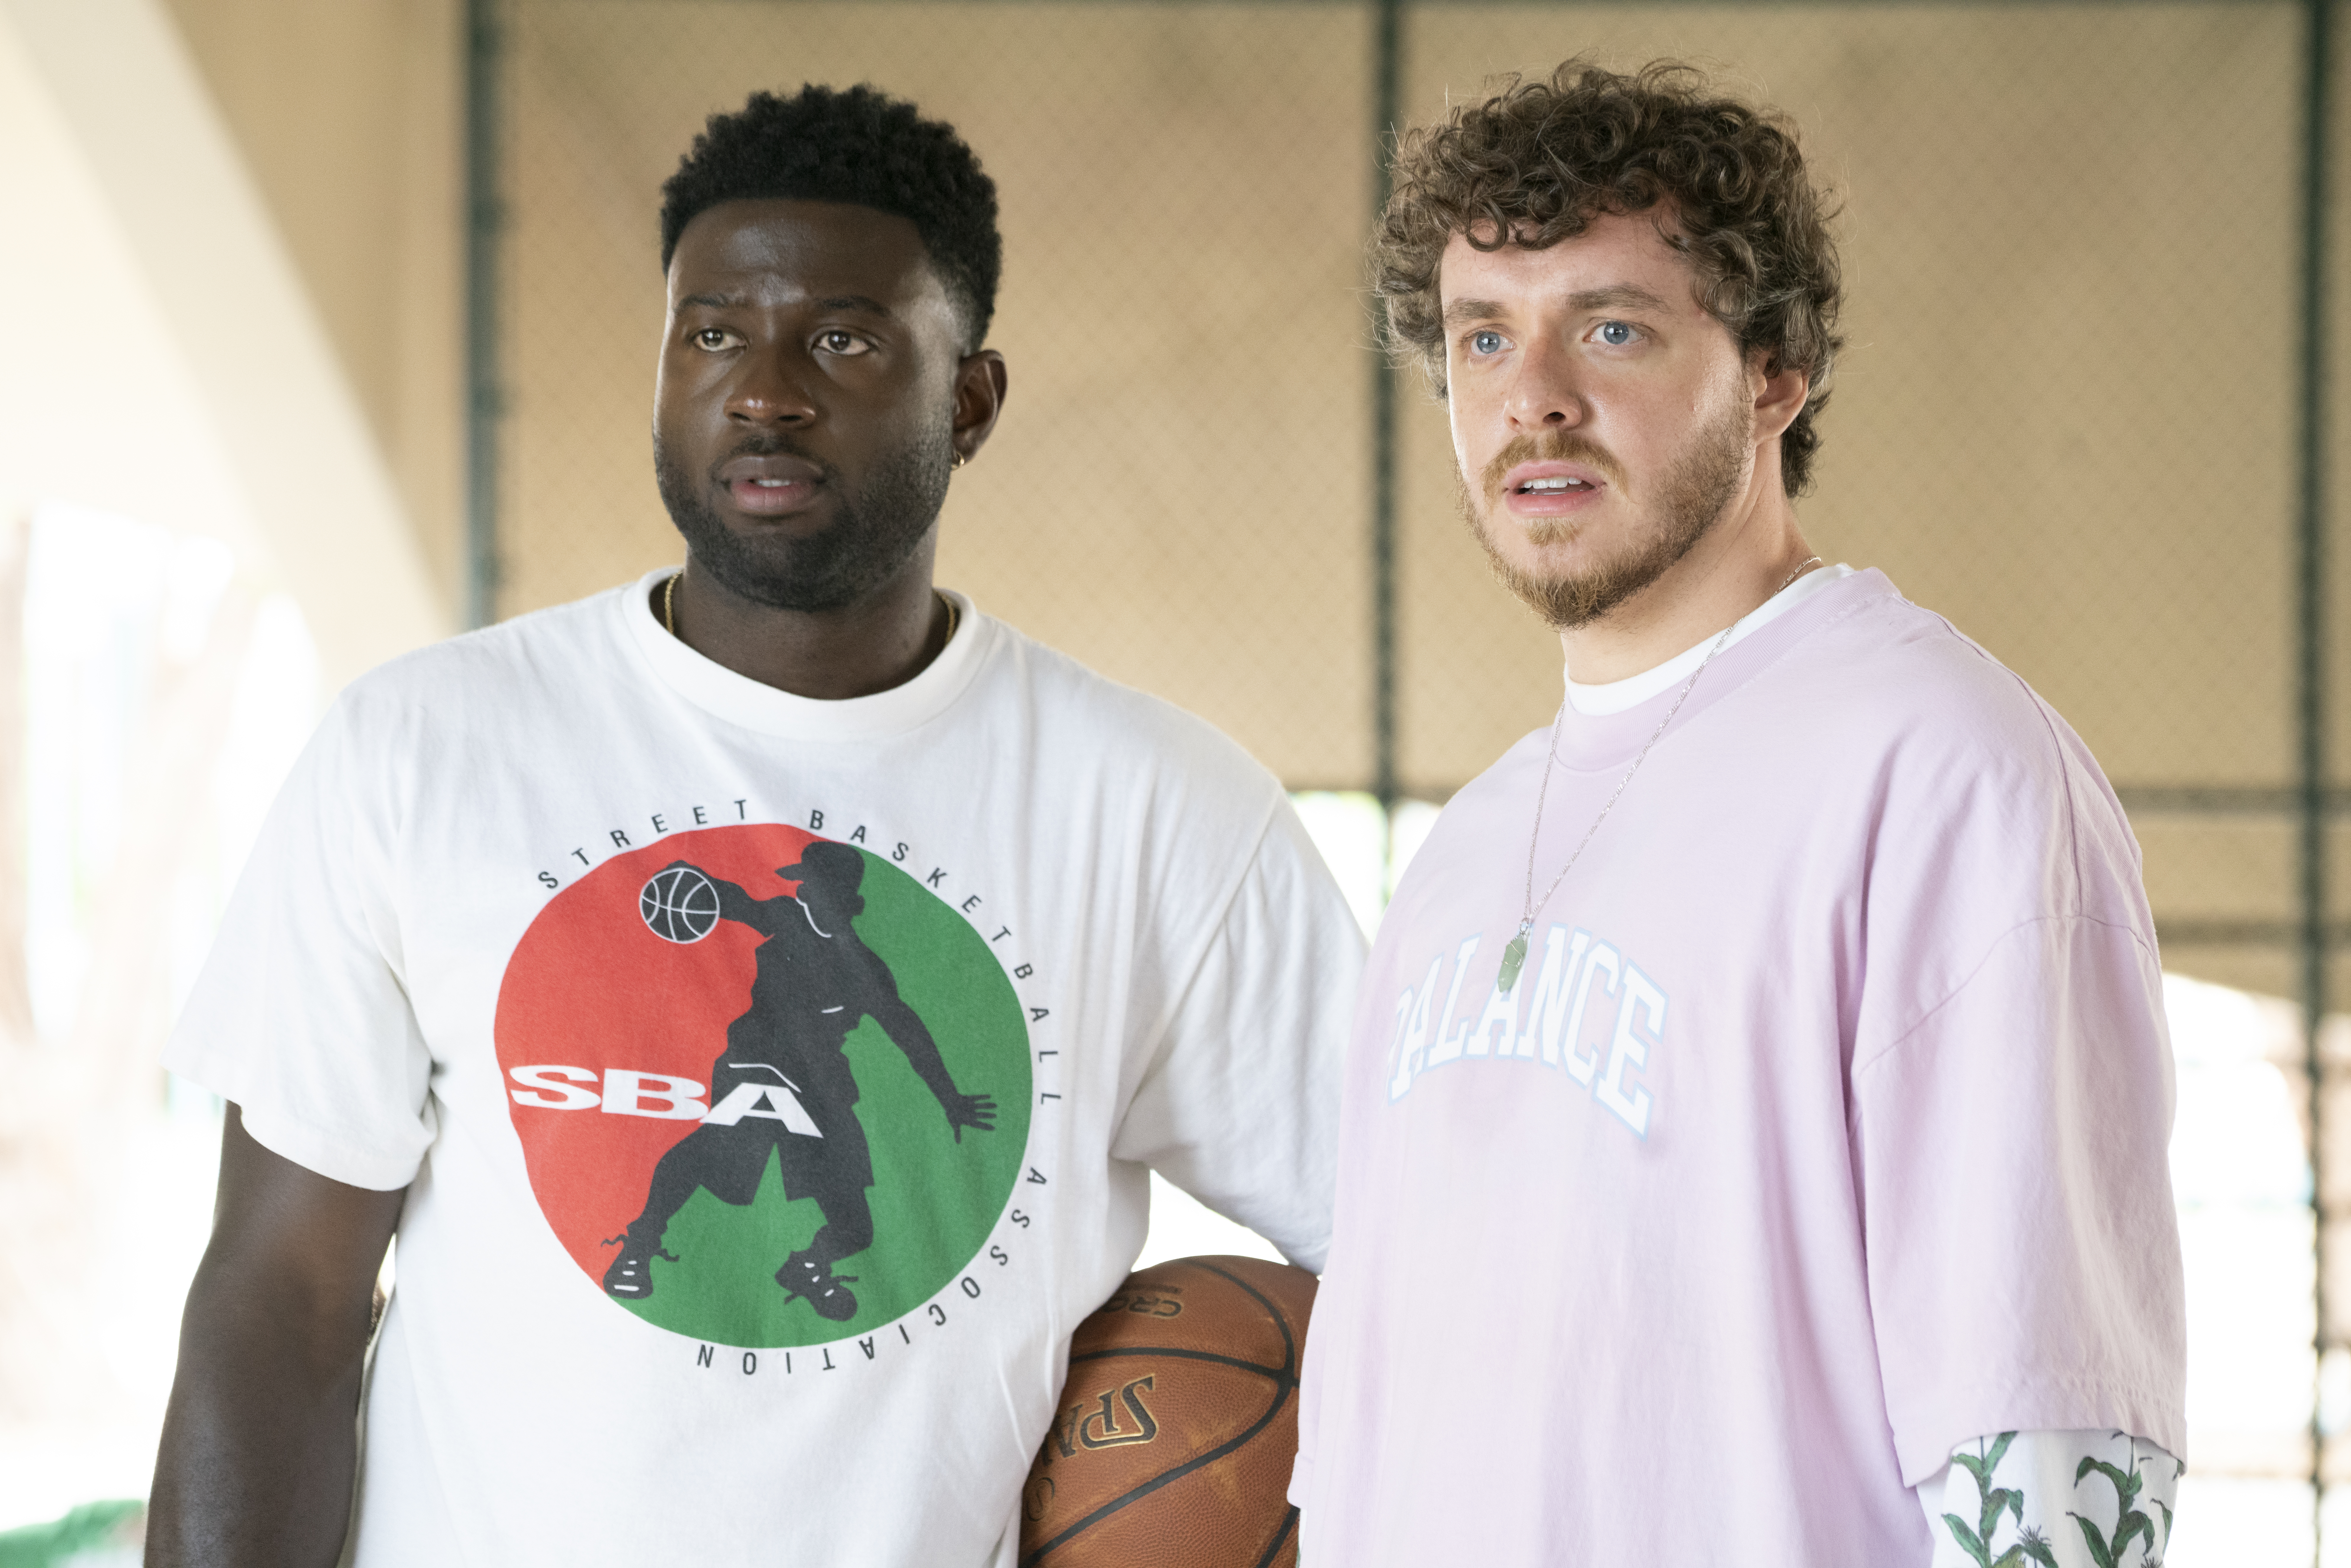 SEE IT: New Trailer and Poster For ‘White Men Can’t Jump’